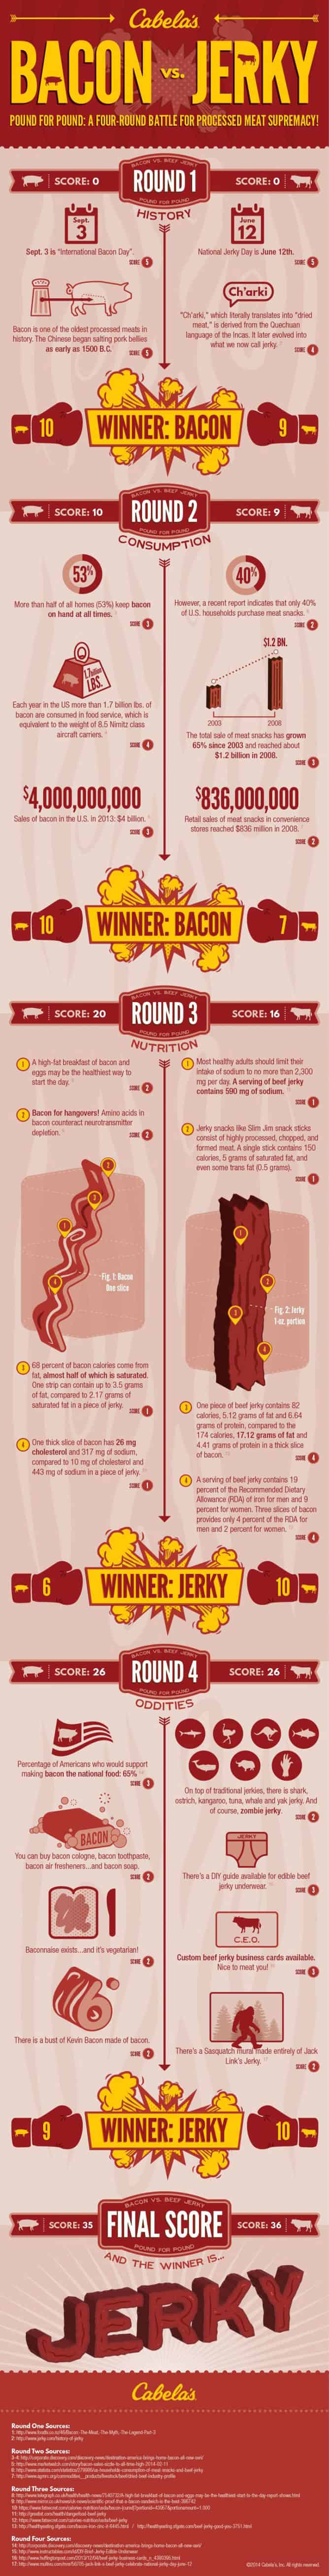 Infographic pitting bacon vs jerky for processed meat supremacy.